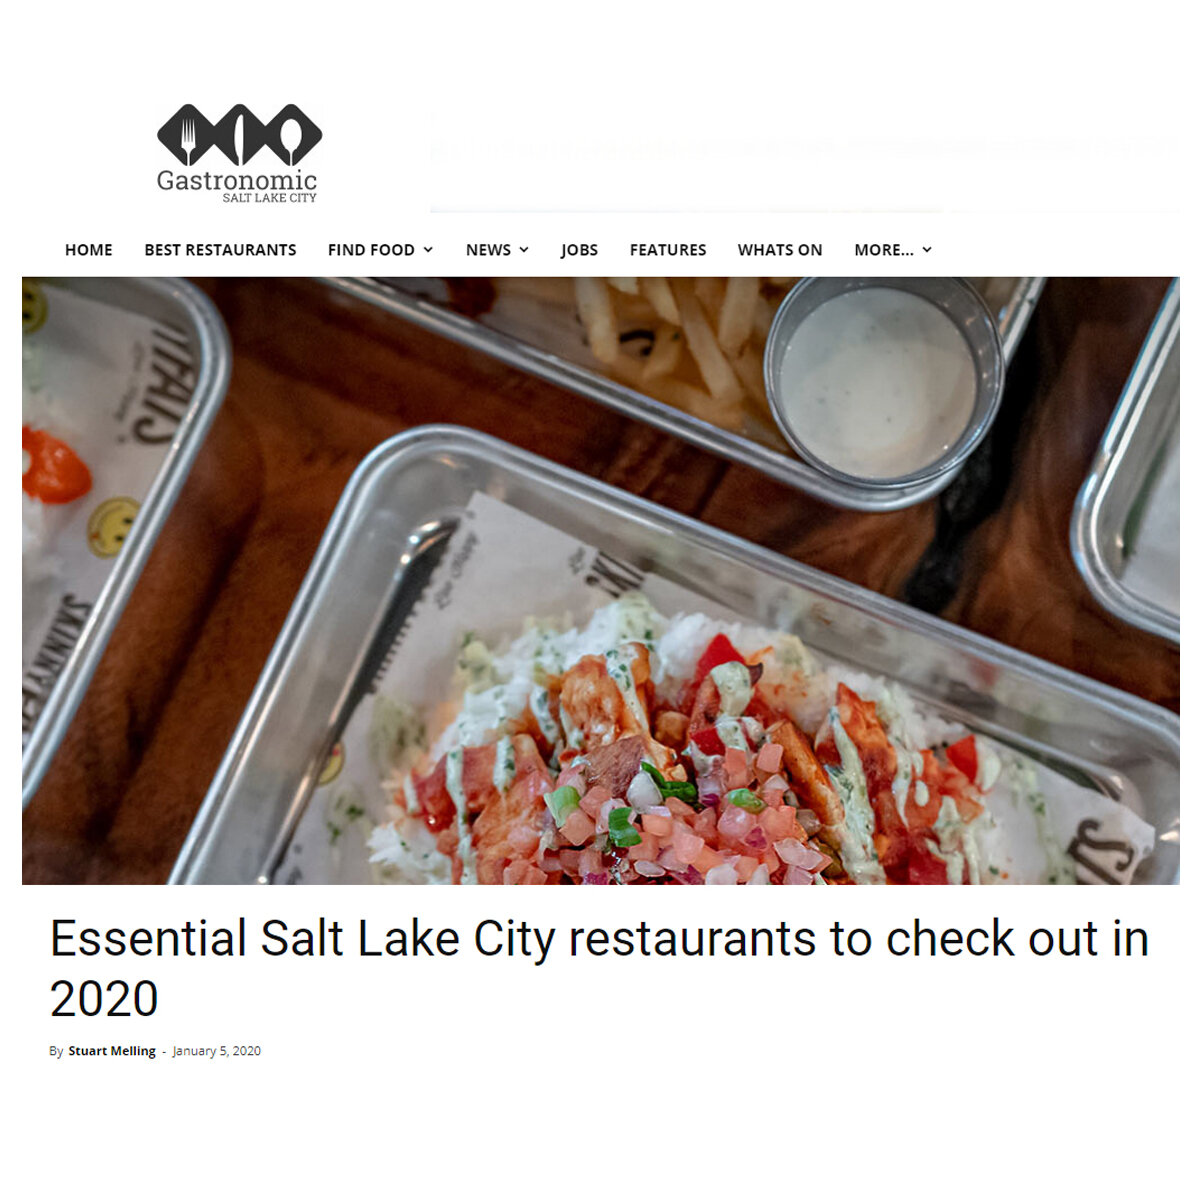  Essential Salt Lake City restaurants to check out in 2020